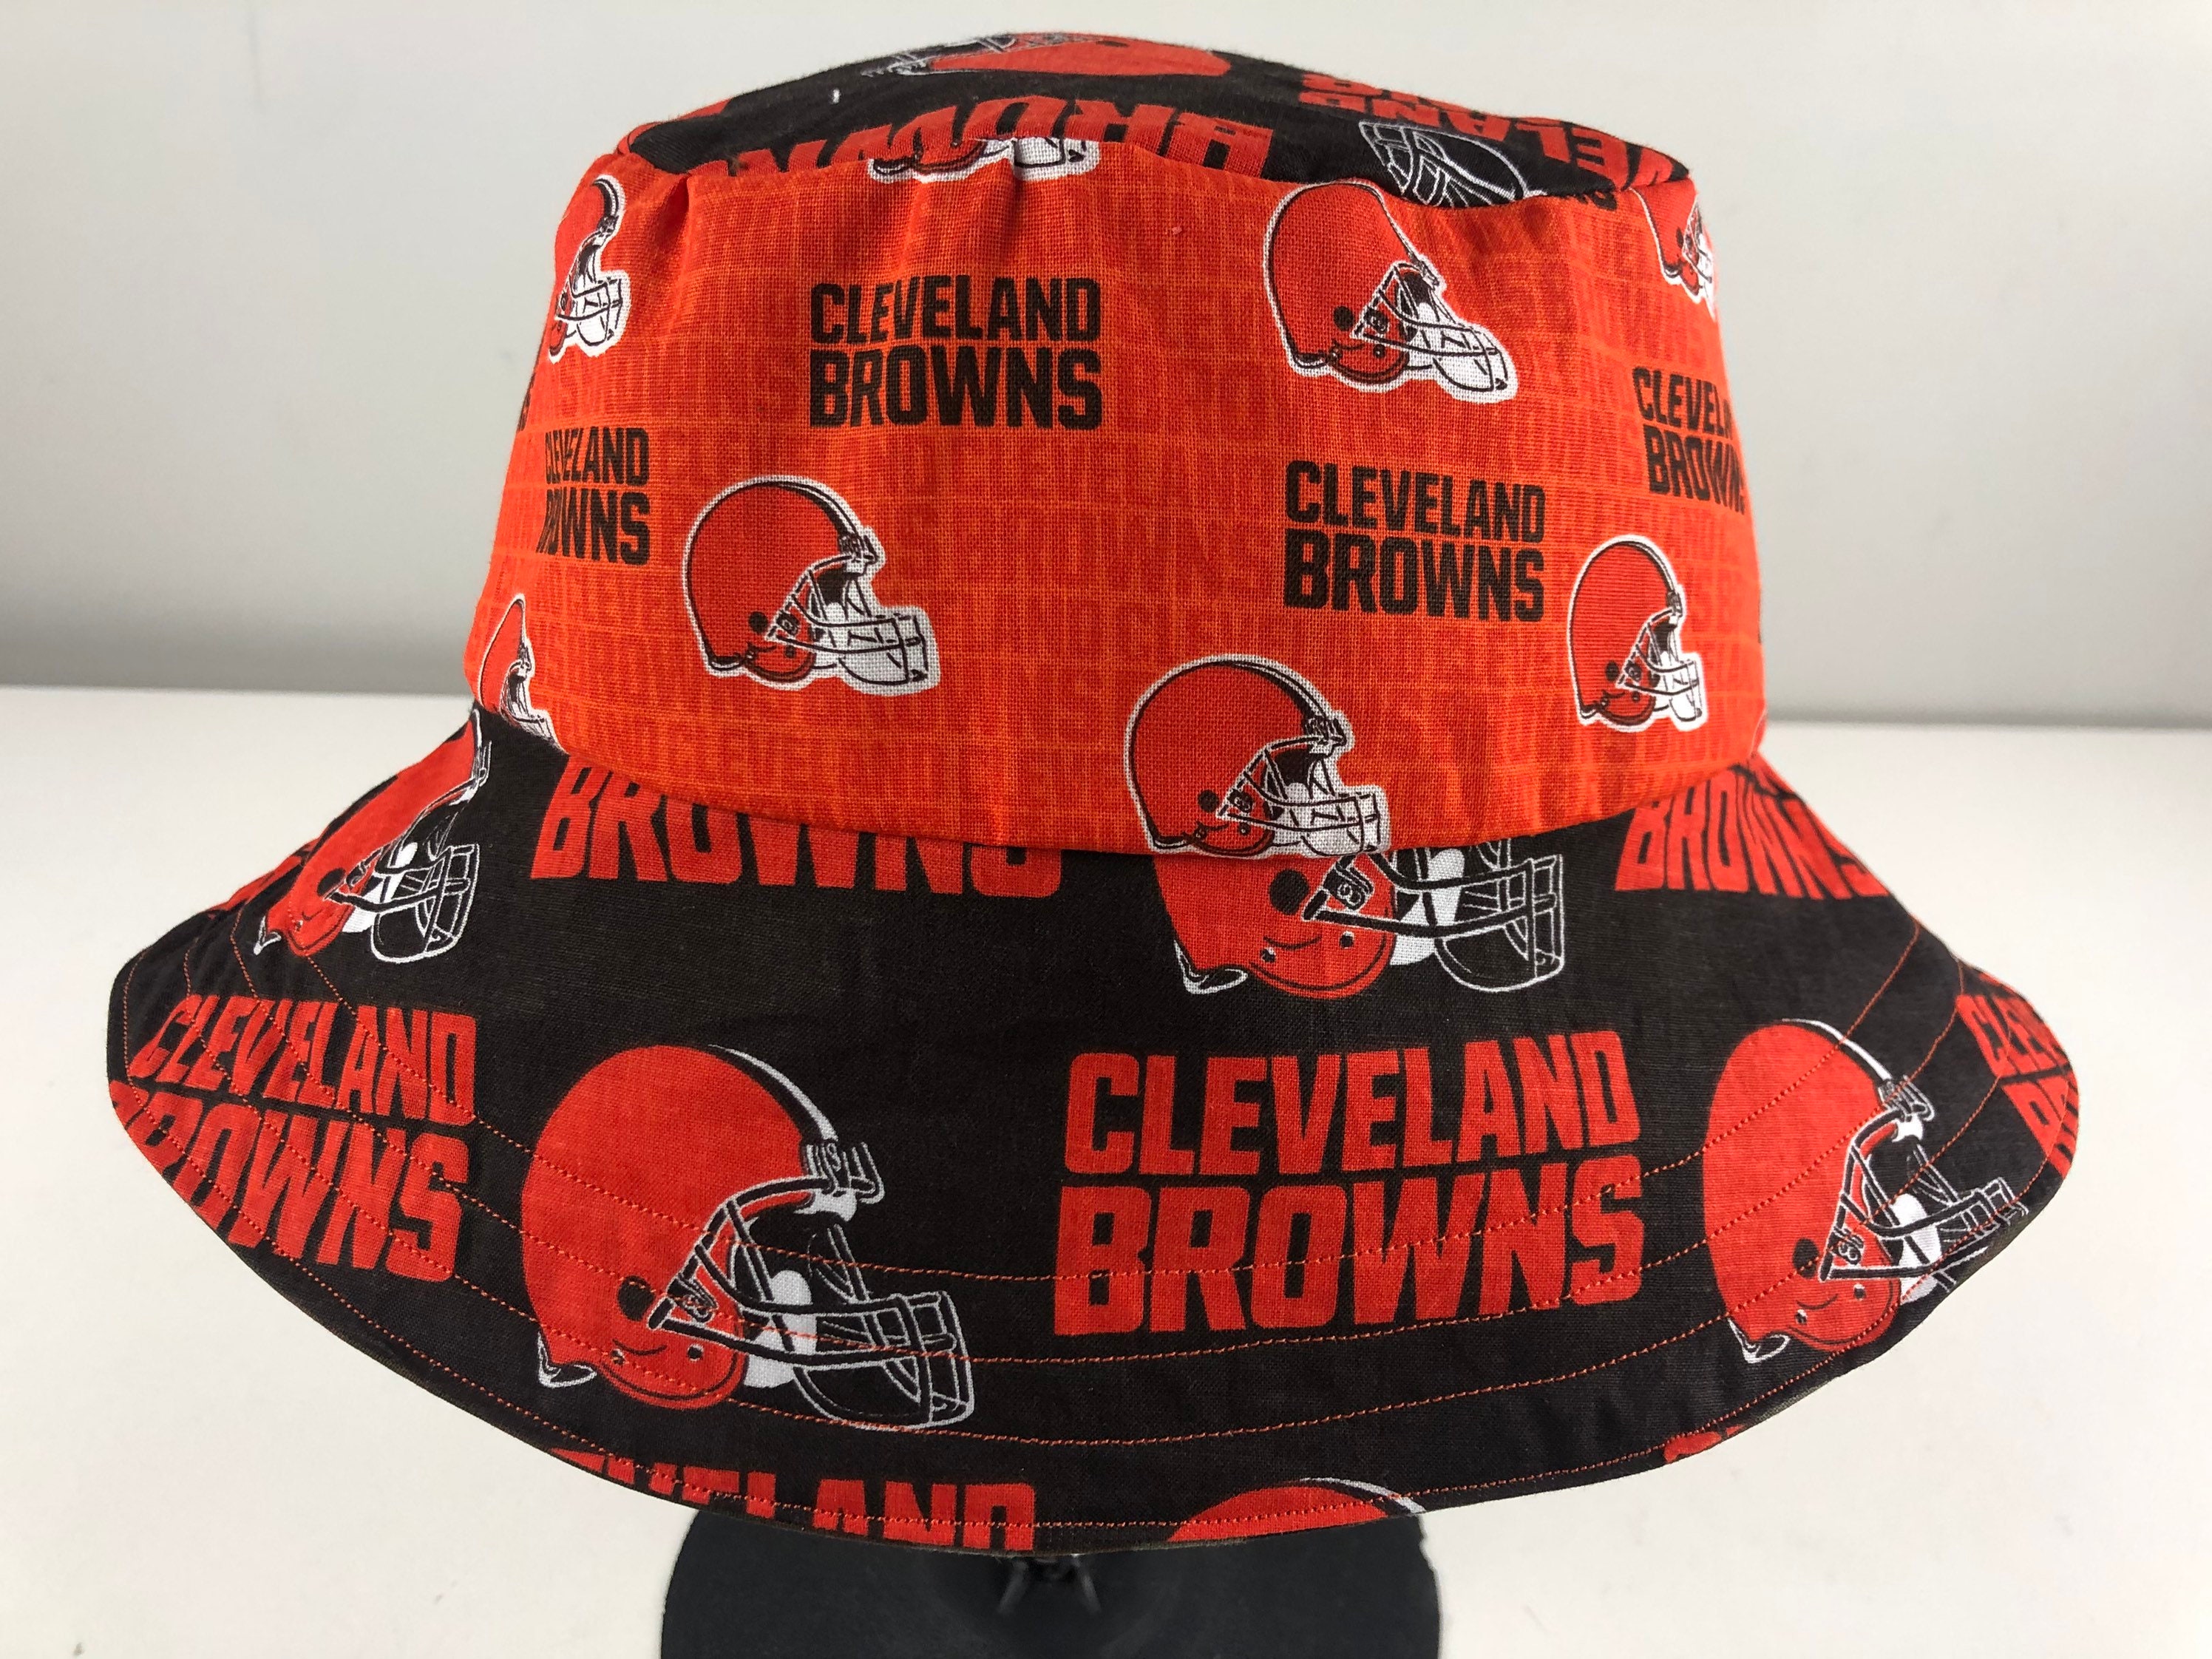 Ohio Colorblock Remix Reversible Bucket Hat Camouflage Camo Denim of  Cleveland Browns Brownies Dawg Pound Fabric 